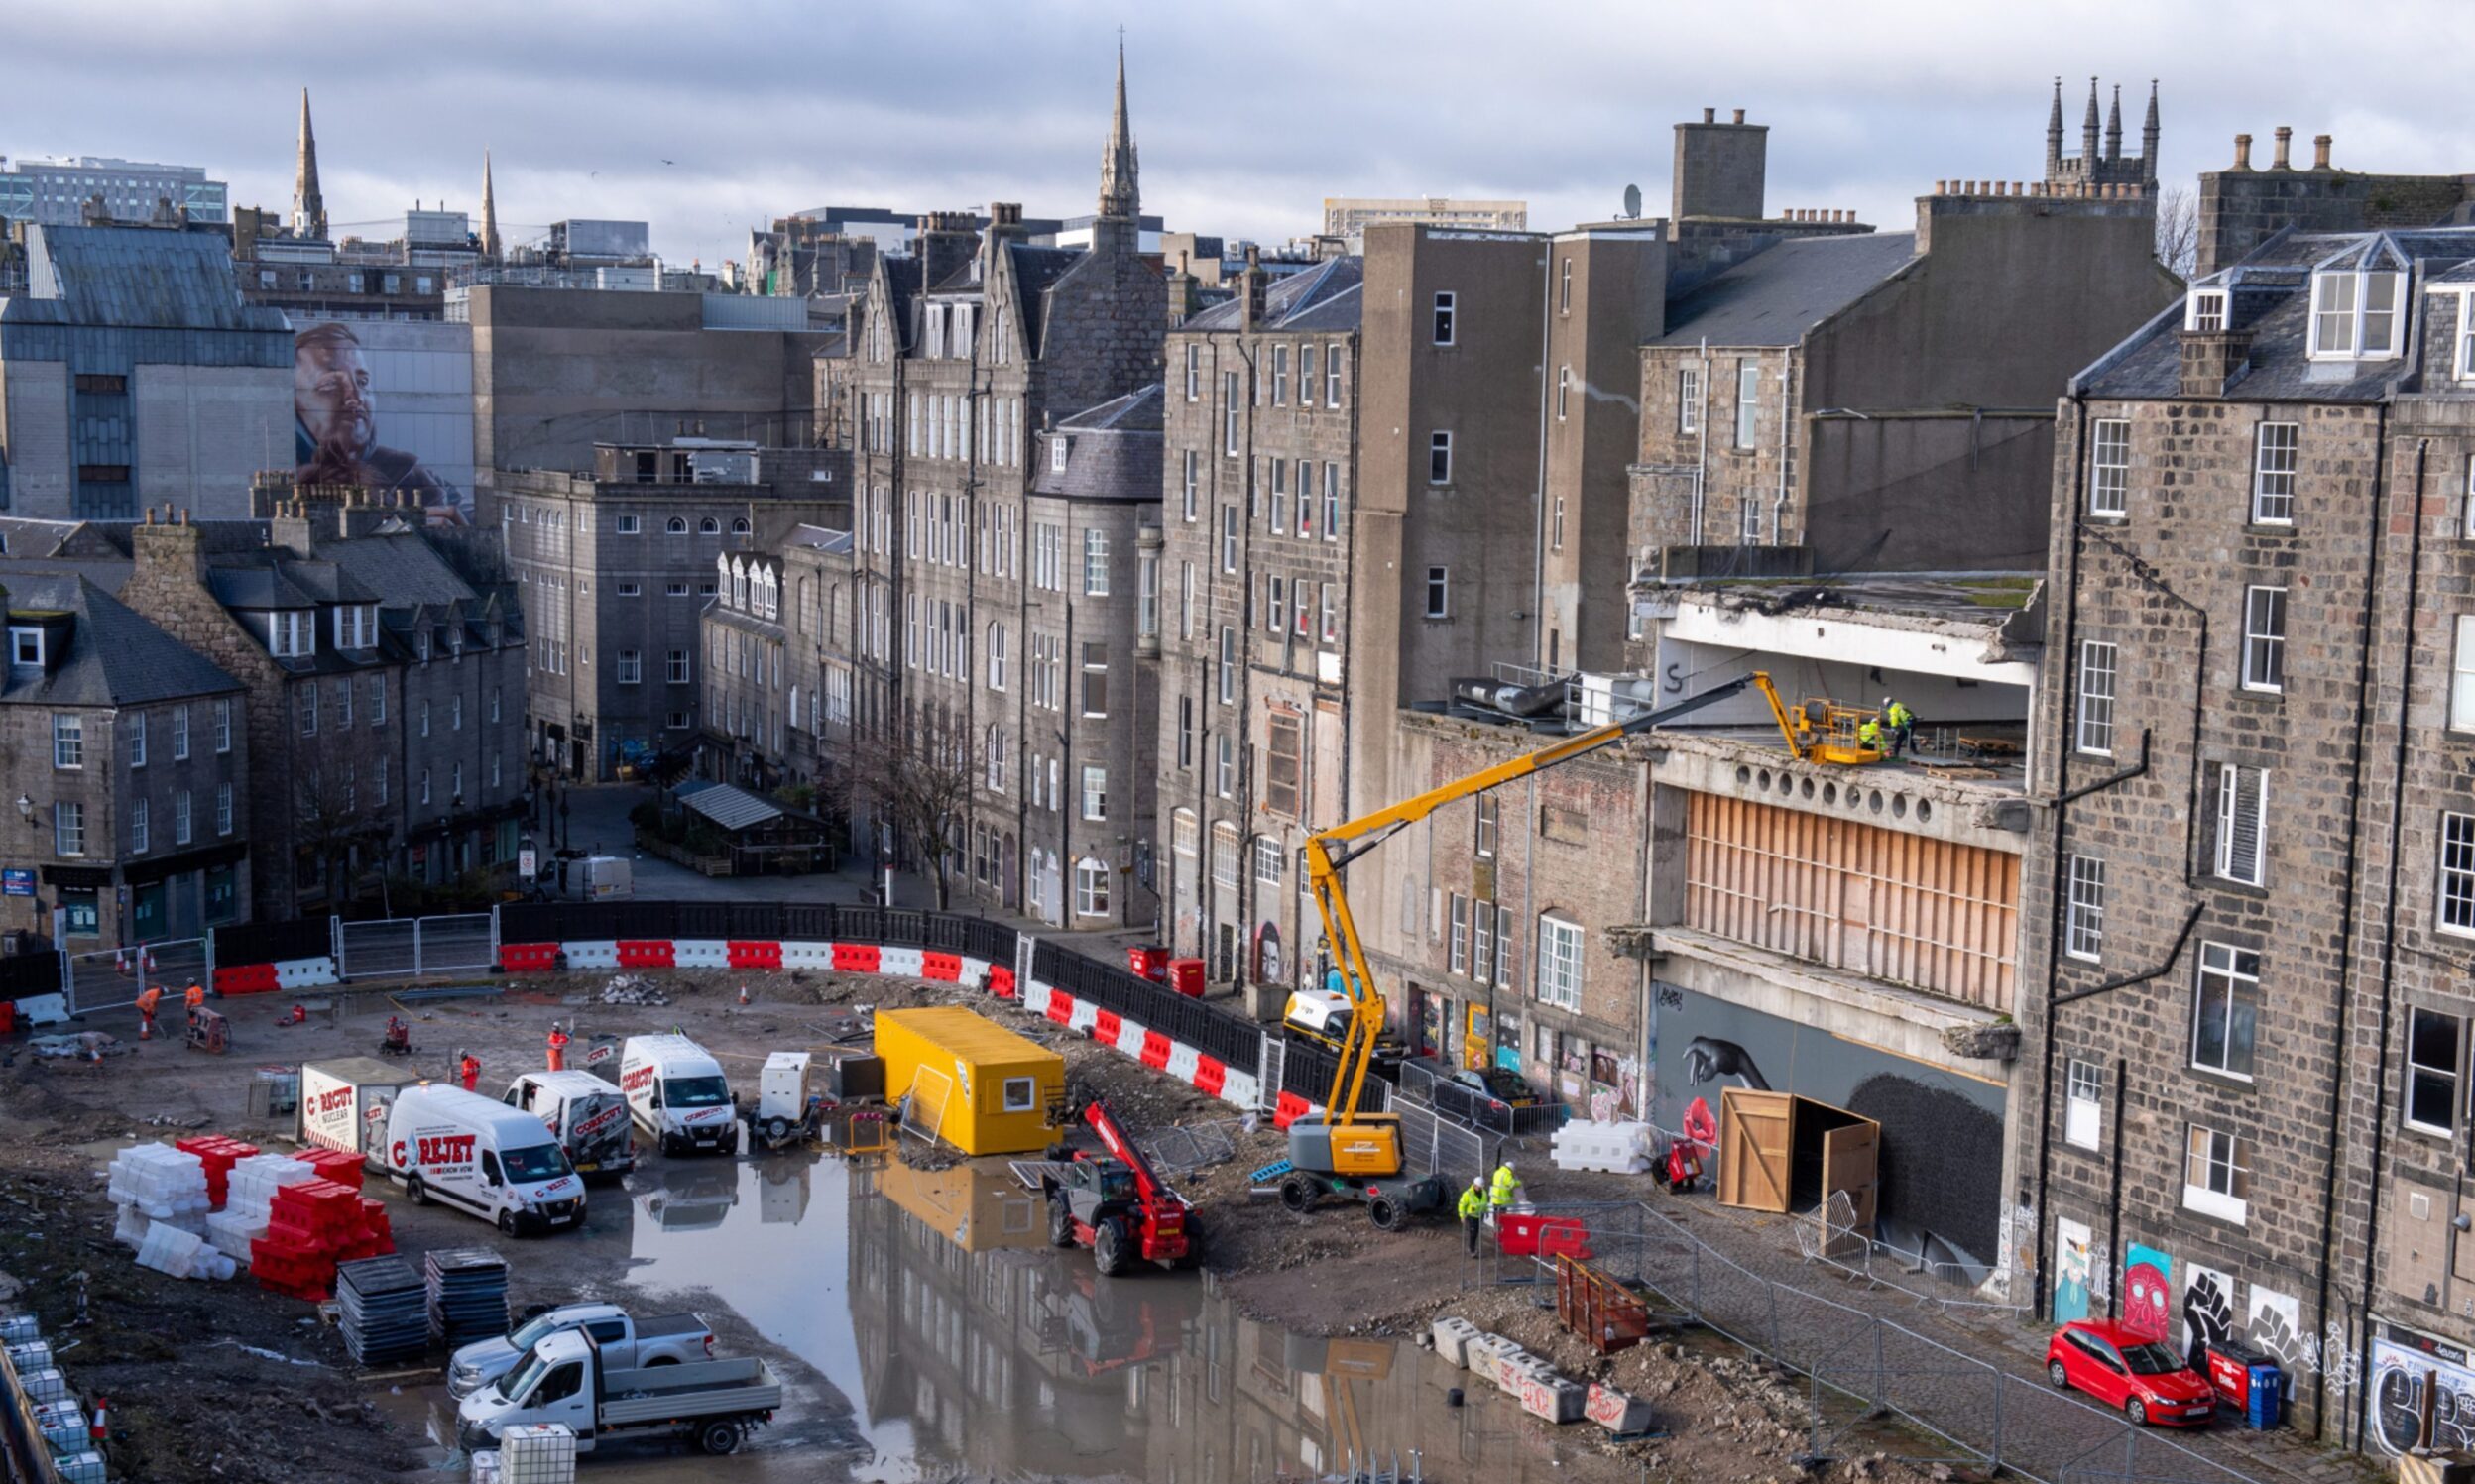 Images reveal demolition work at the old Aberdeen BHS getting under way.